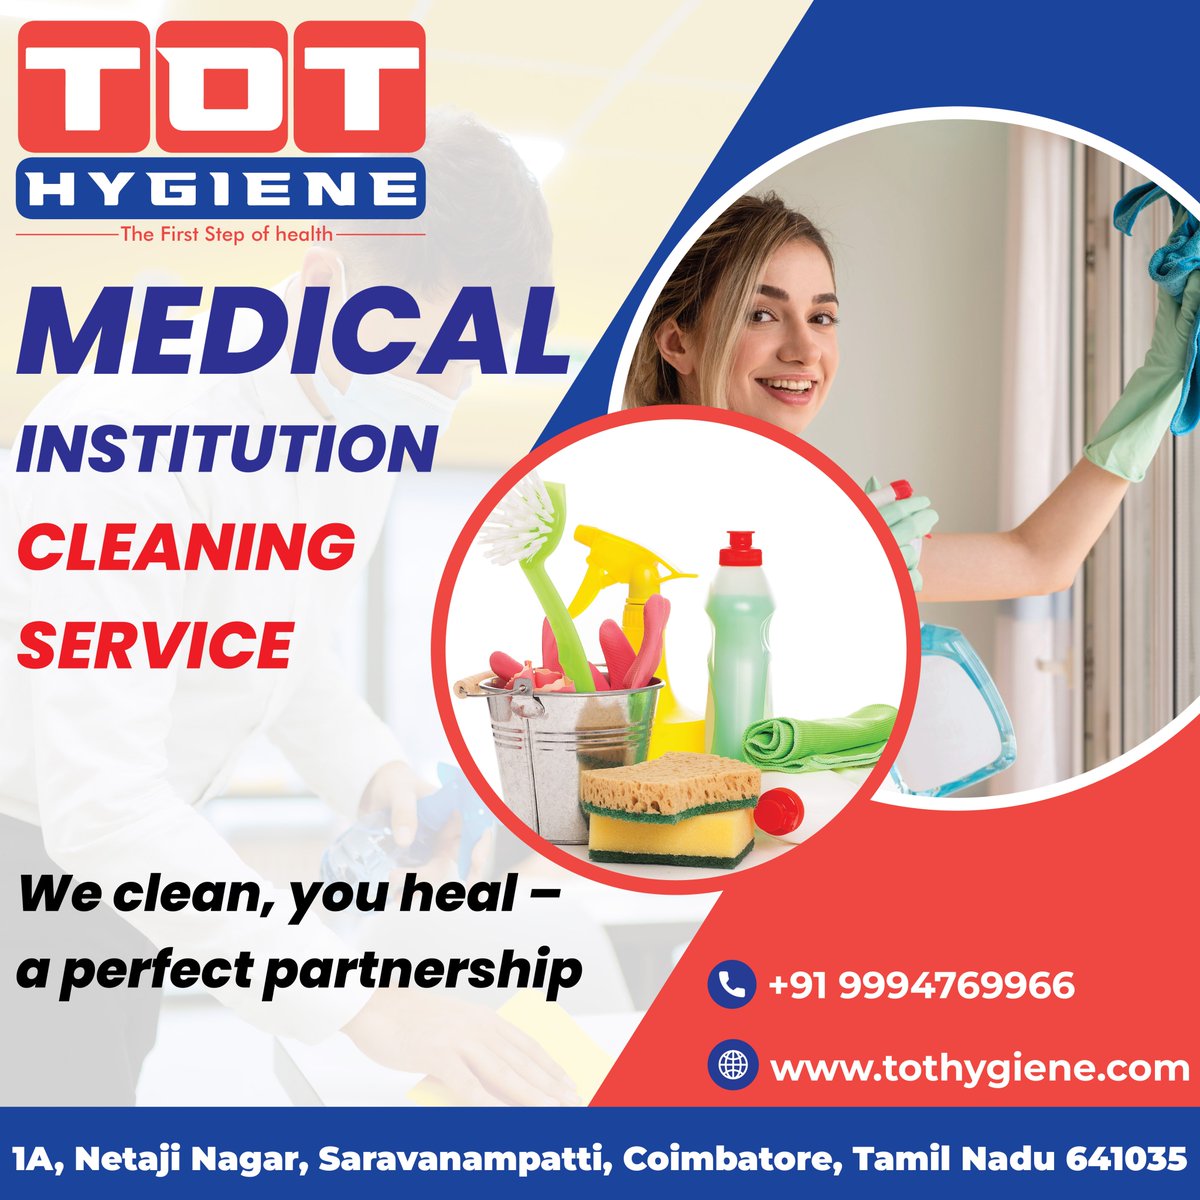 🌐See it here: tothygiene.com
📞Callnow: 9994769966

#TOTHygiene #MedicalCleaning #CleanAndSafe 
#MedicalInstitutionCleaning #InfectionControl
#CleanHealth #SanitarySolutions #HealthFacilityClean
#HealthcareMaintenance #ProfessionalCleaning
#Coimbatore